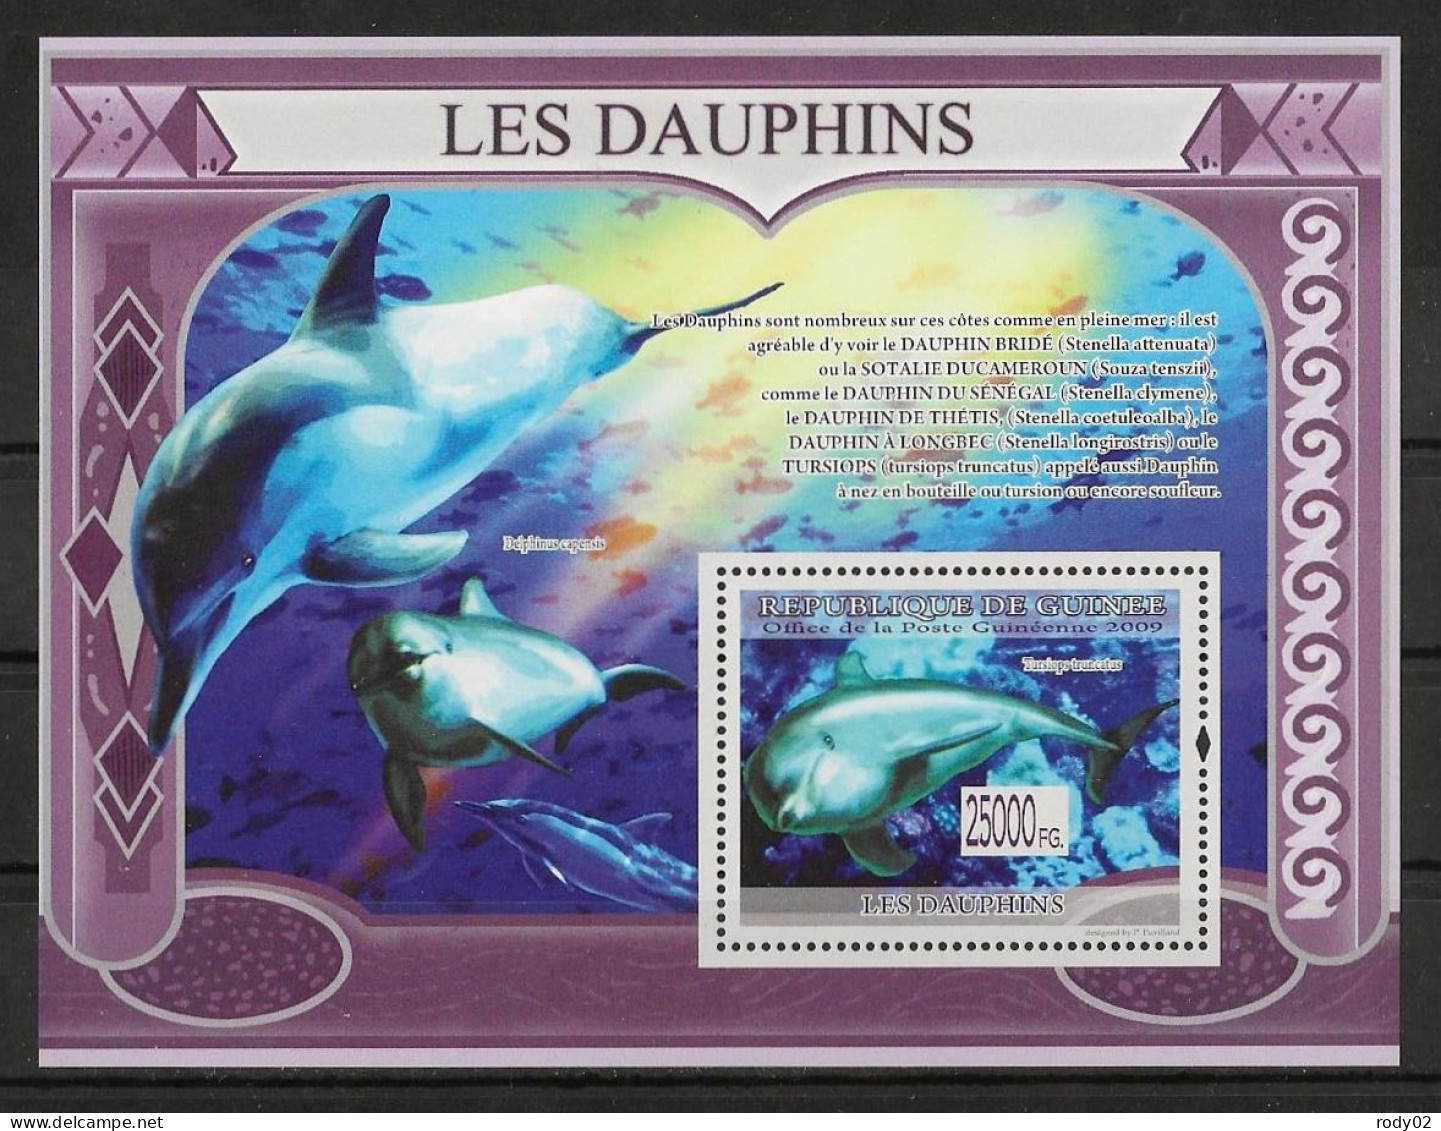 GUINEE - DAUPHINS - N° 4008 A 4013 ET BF 968 - NEUF** MNH - Dauphins